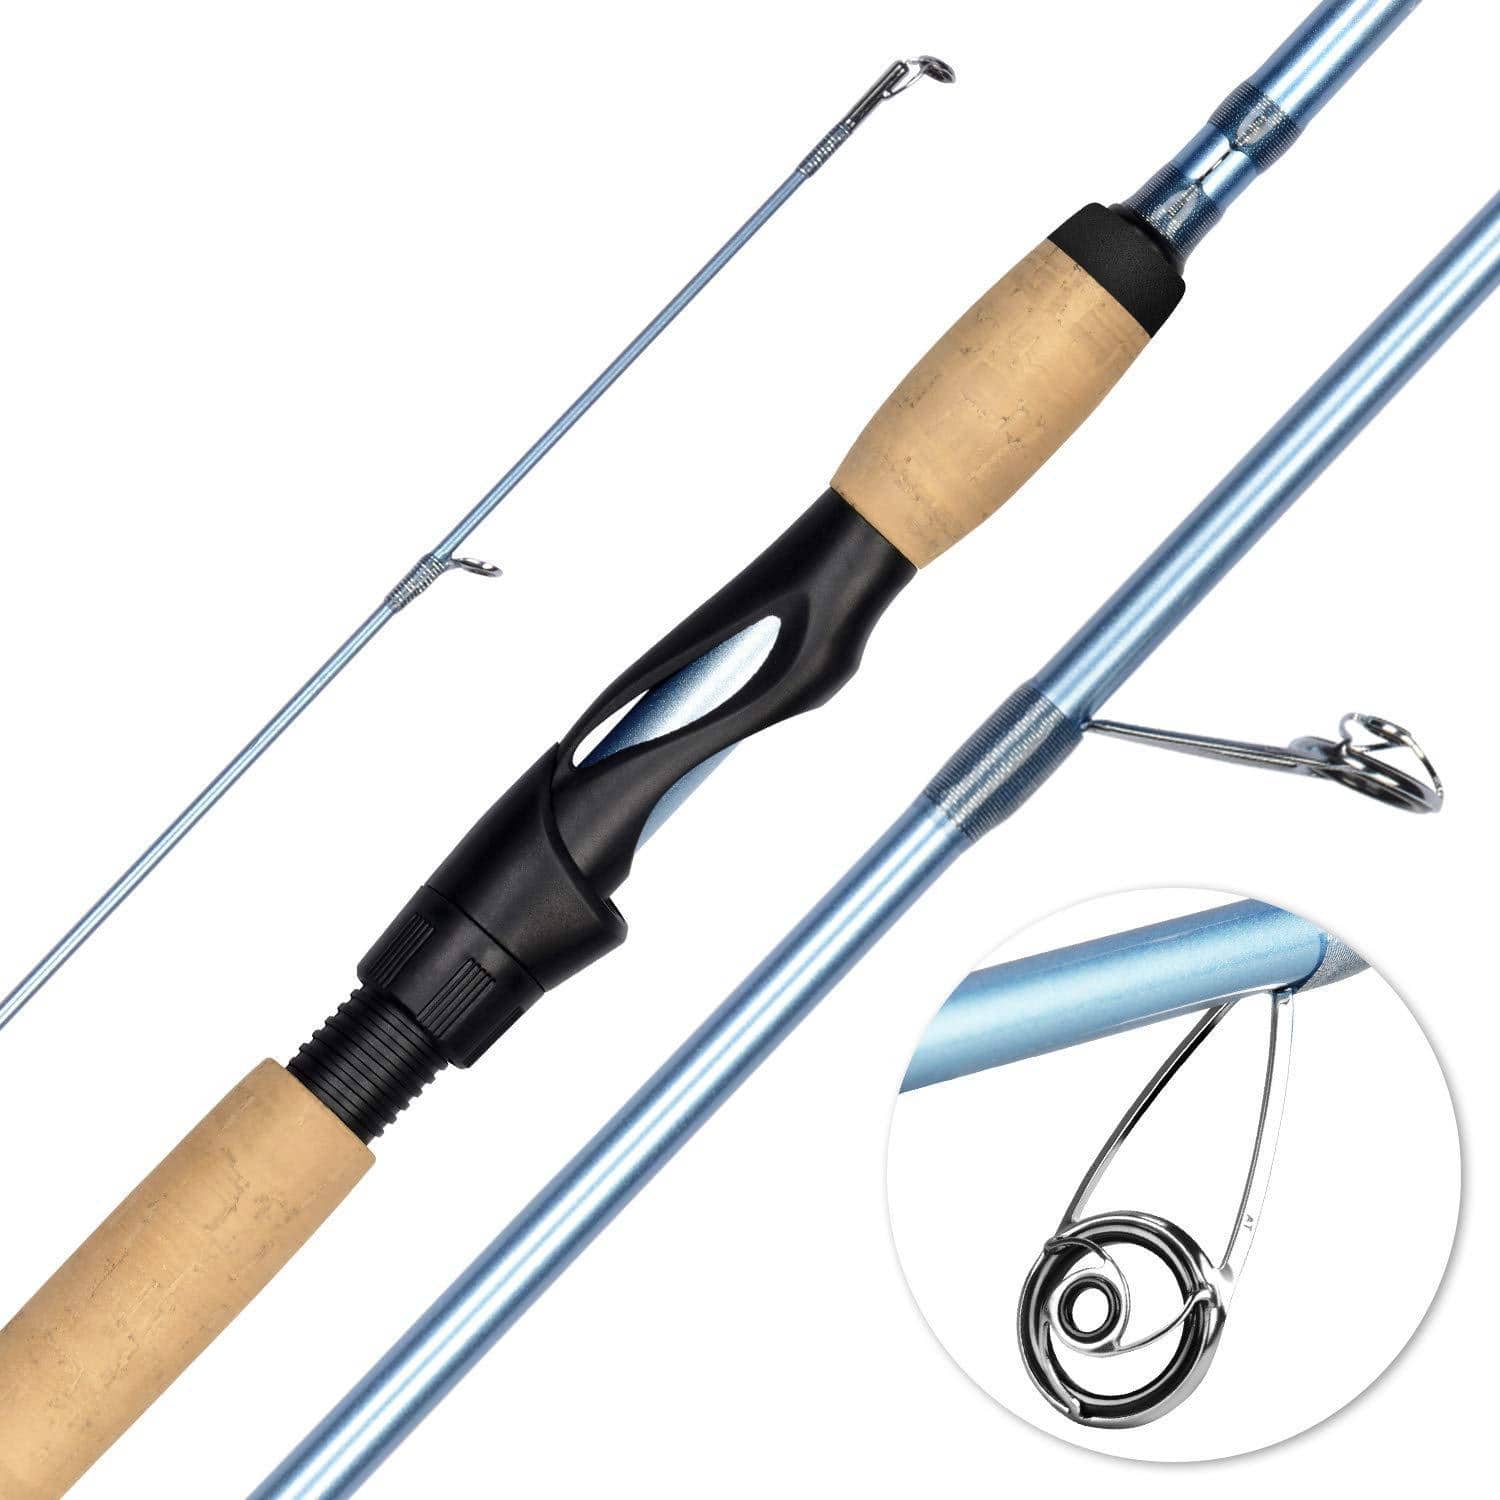 What Makes a Good Saltwater Fishing Rod?